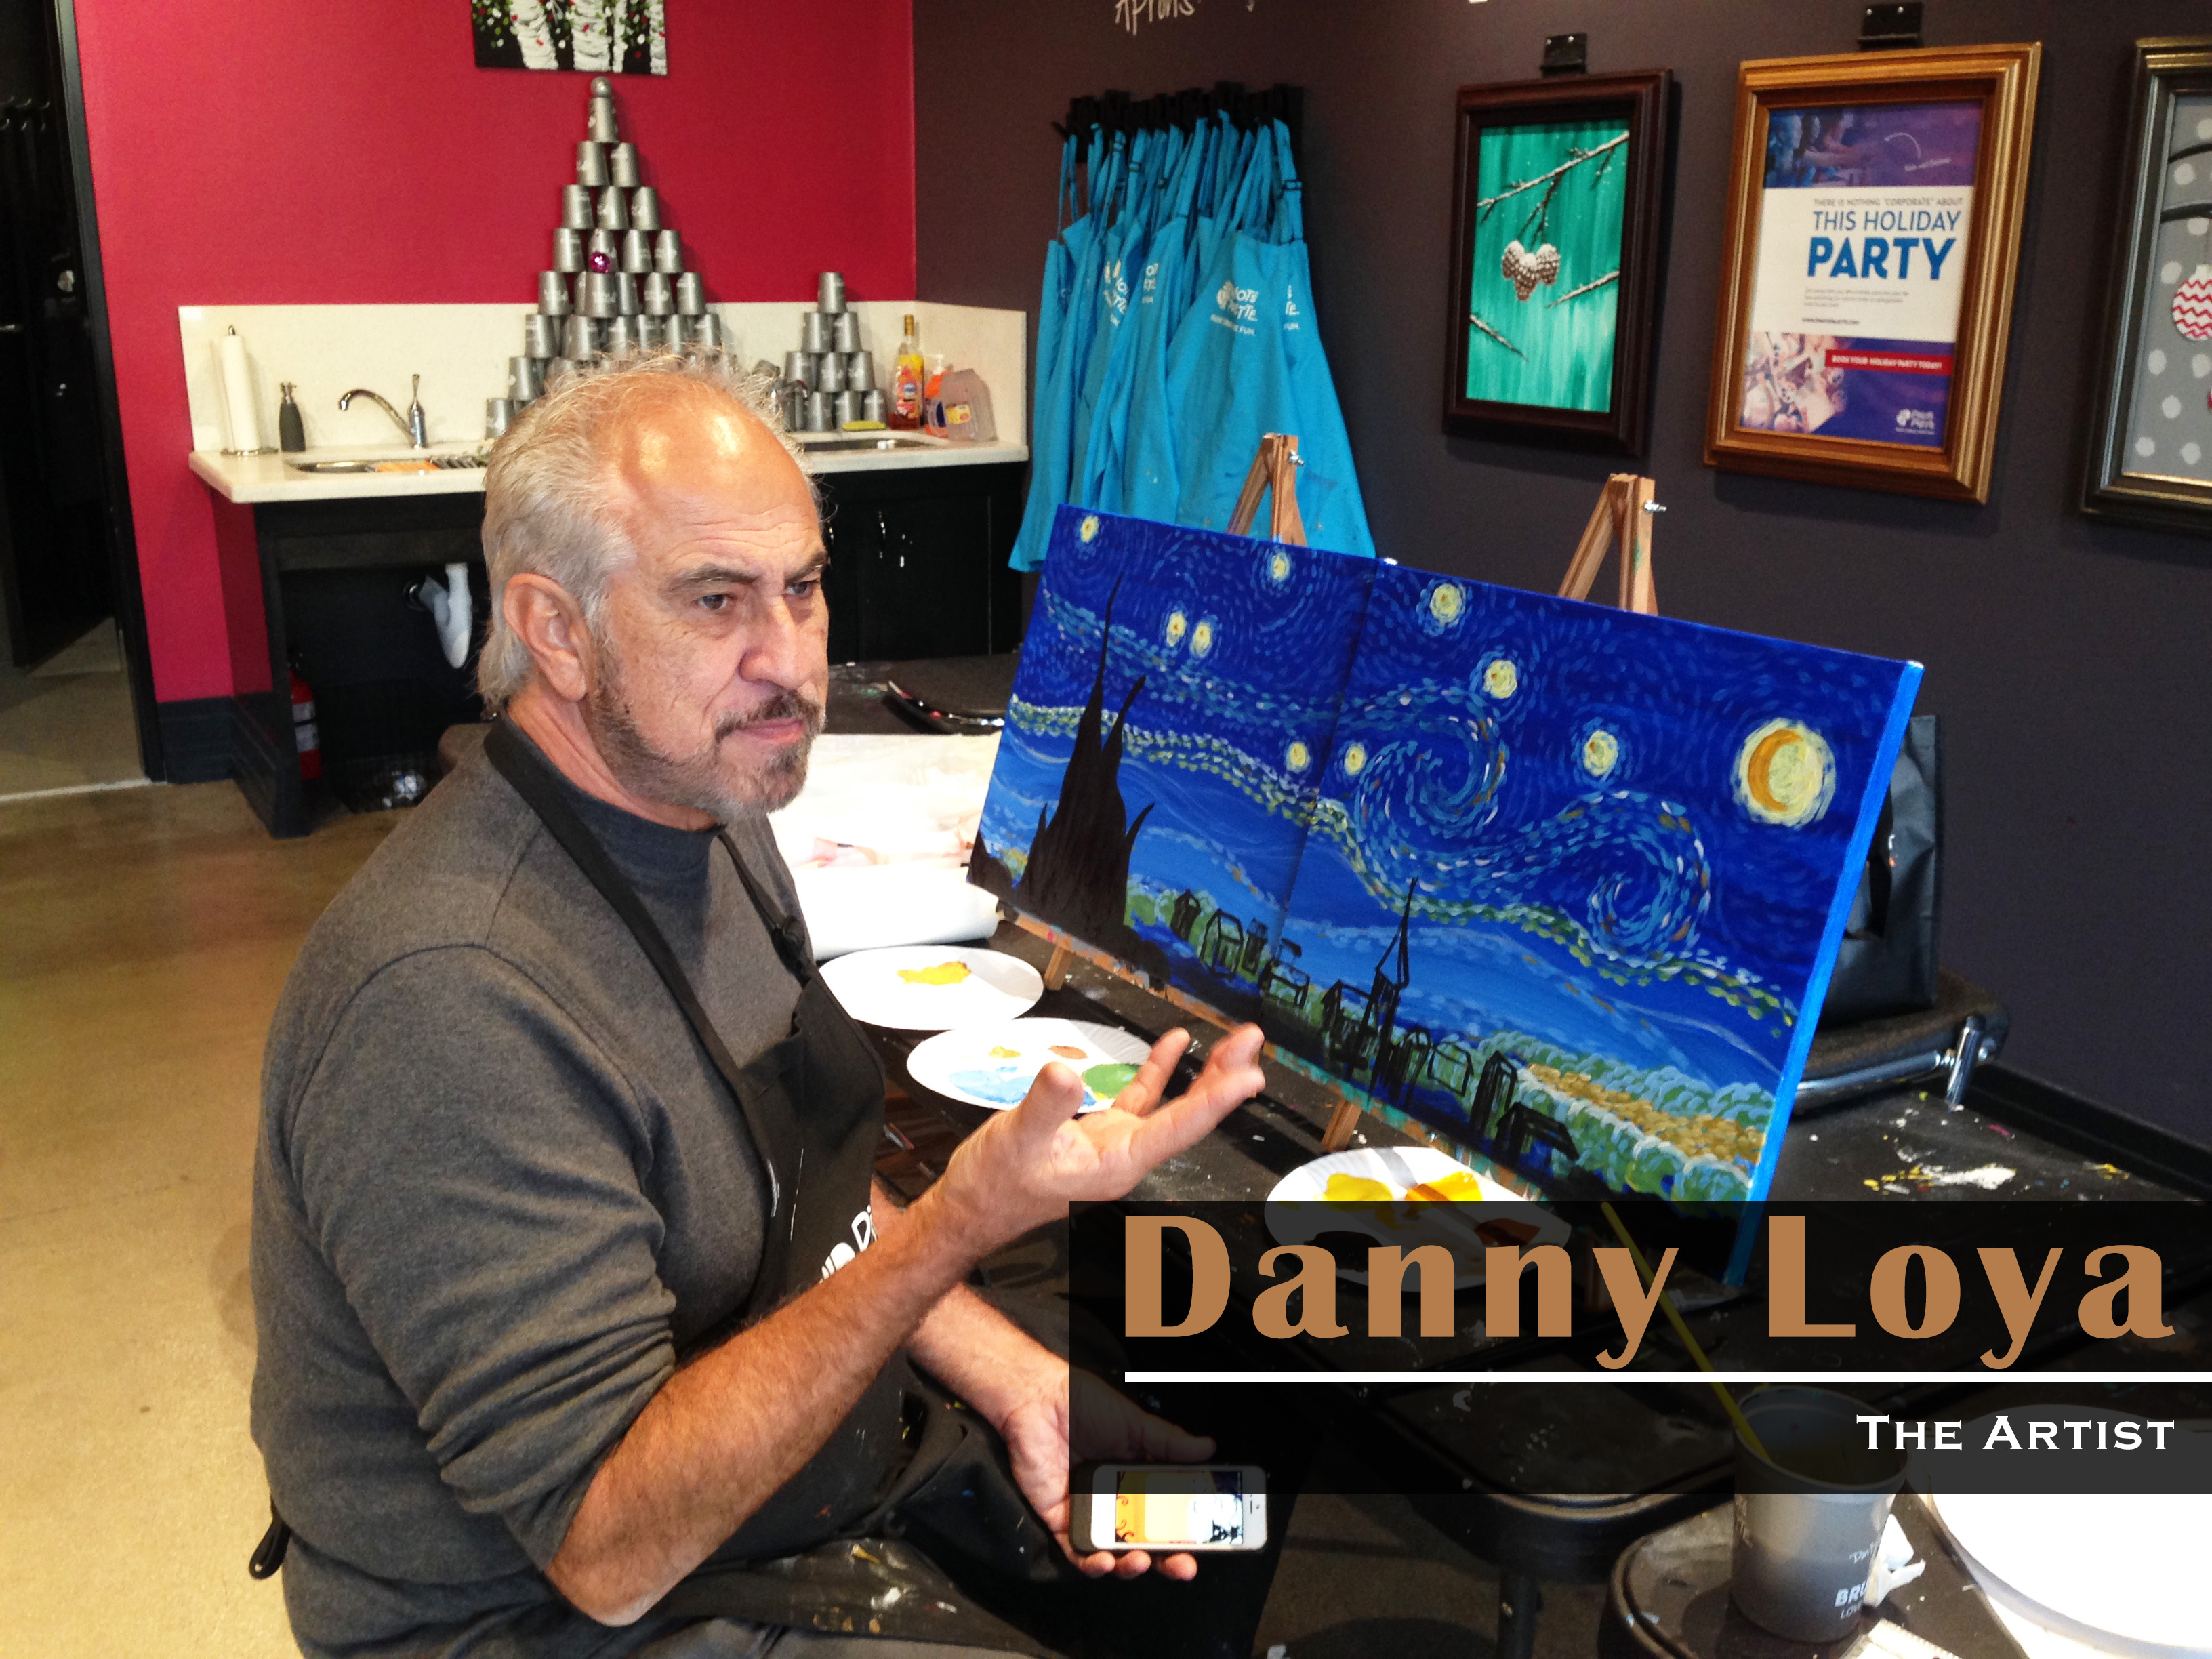 Interview with Danny The Artist